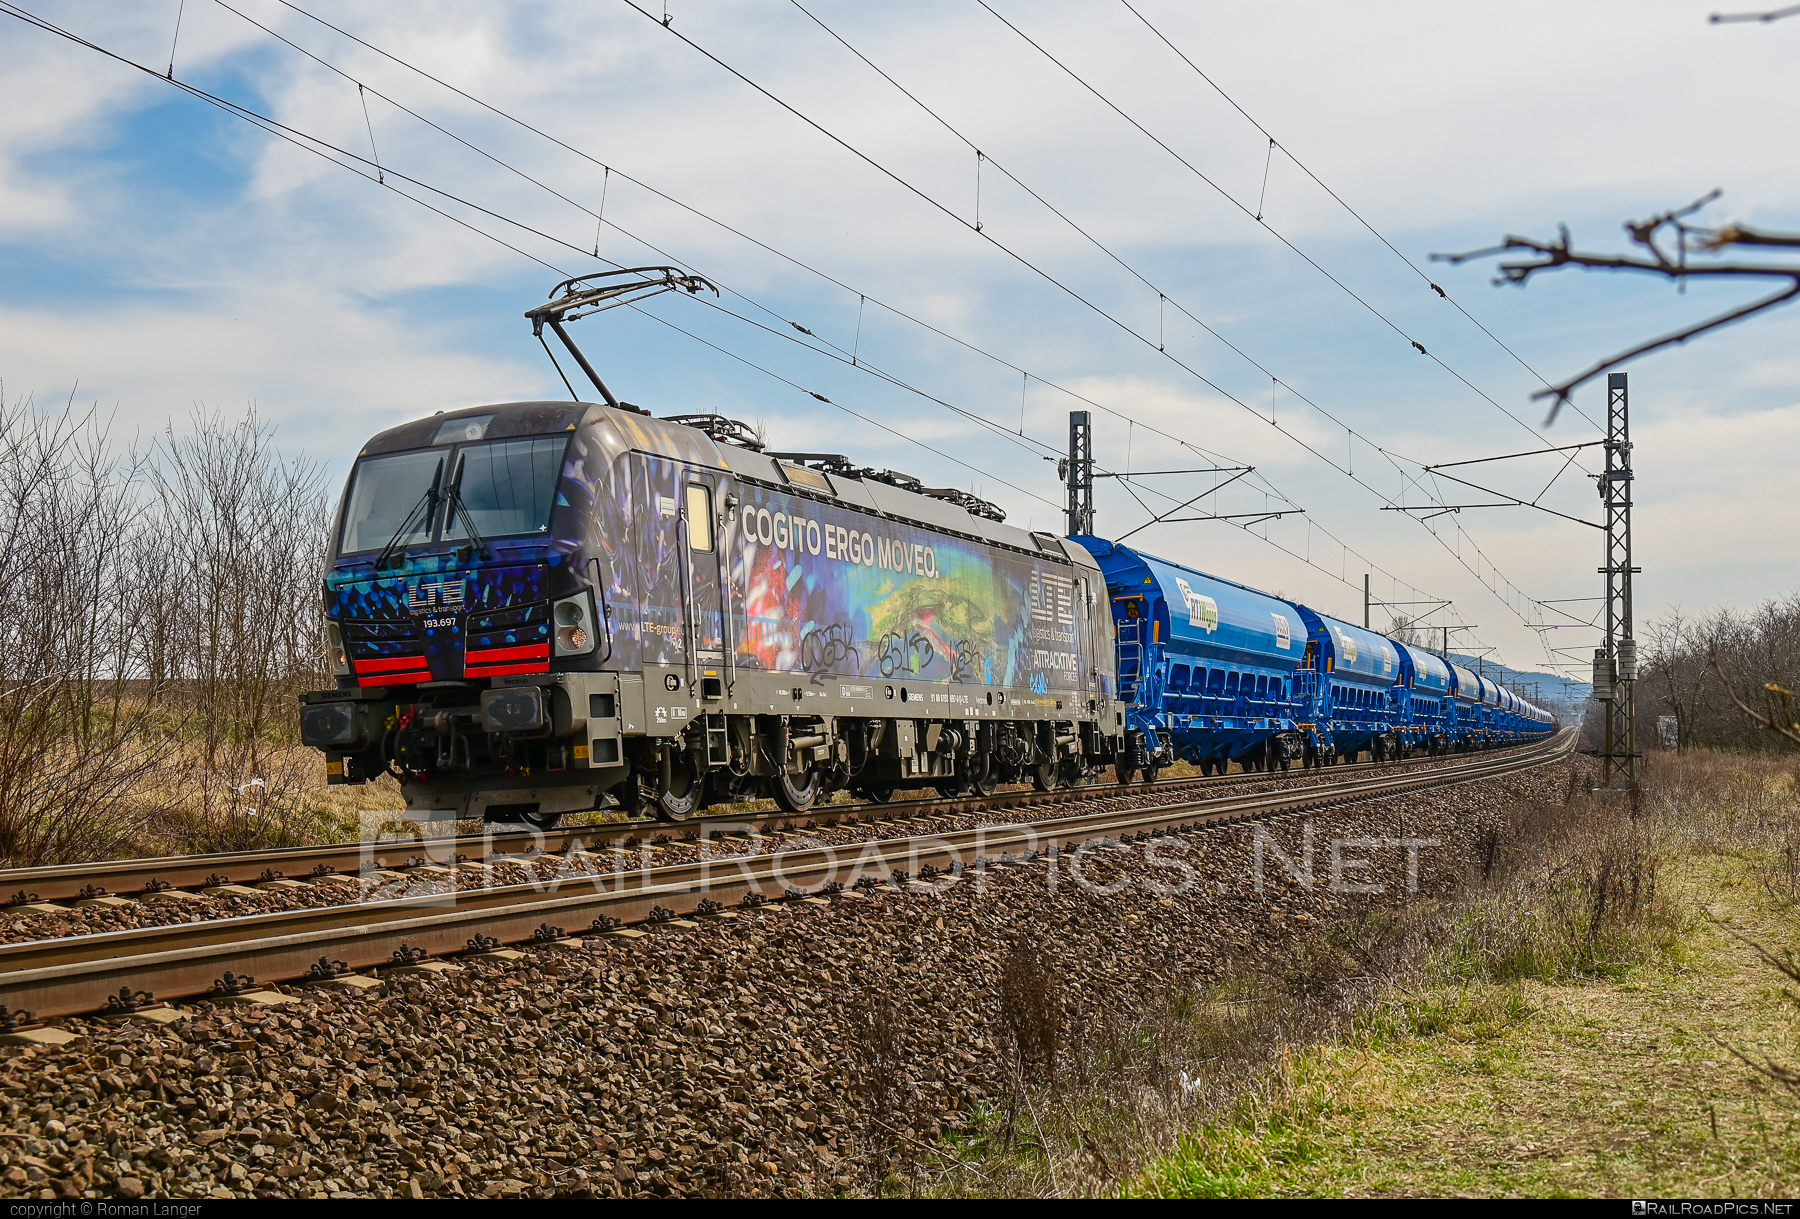 Siemens Vectron MS - 193 697 operated by LTE Logistik und Transport GmbH #duslo #hopperwagon #lte #ltelogistikundtransport #ltelogistikundtransportgmbh #rtiwagon #siemens #siemensVectron #siemensVectronMS #vectron #vectronMS